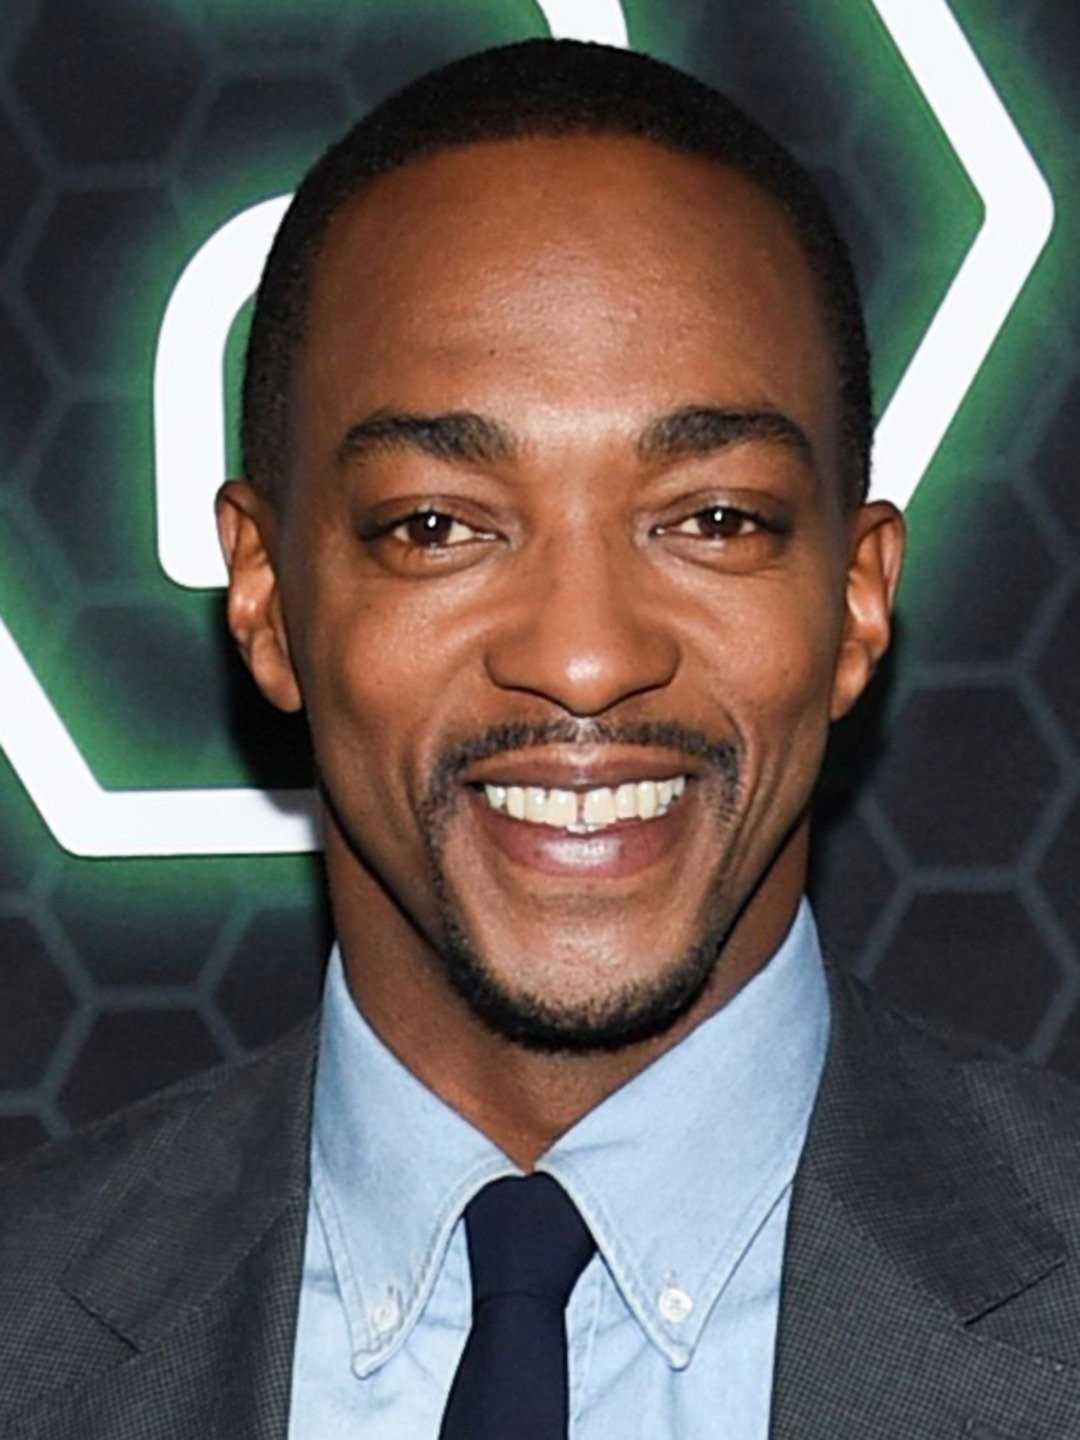 “I came into the New Orleans Airport on a really late flight. I had to stop and charge my phone once I got off, so I was one of the last people to walk out. As I was walking to baggage claim, none other than Anthony Mackie came out of a side hallway. I walked up and said hi, and he was the nicest person! I’m a huge Marvel fan, and this was when Civil War was coming out. He chatted with me the whole way out to baggage claim. Super nice and down-to-earth!”